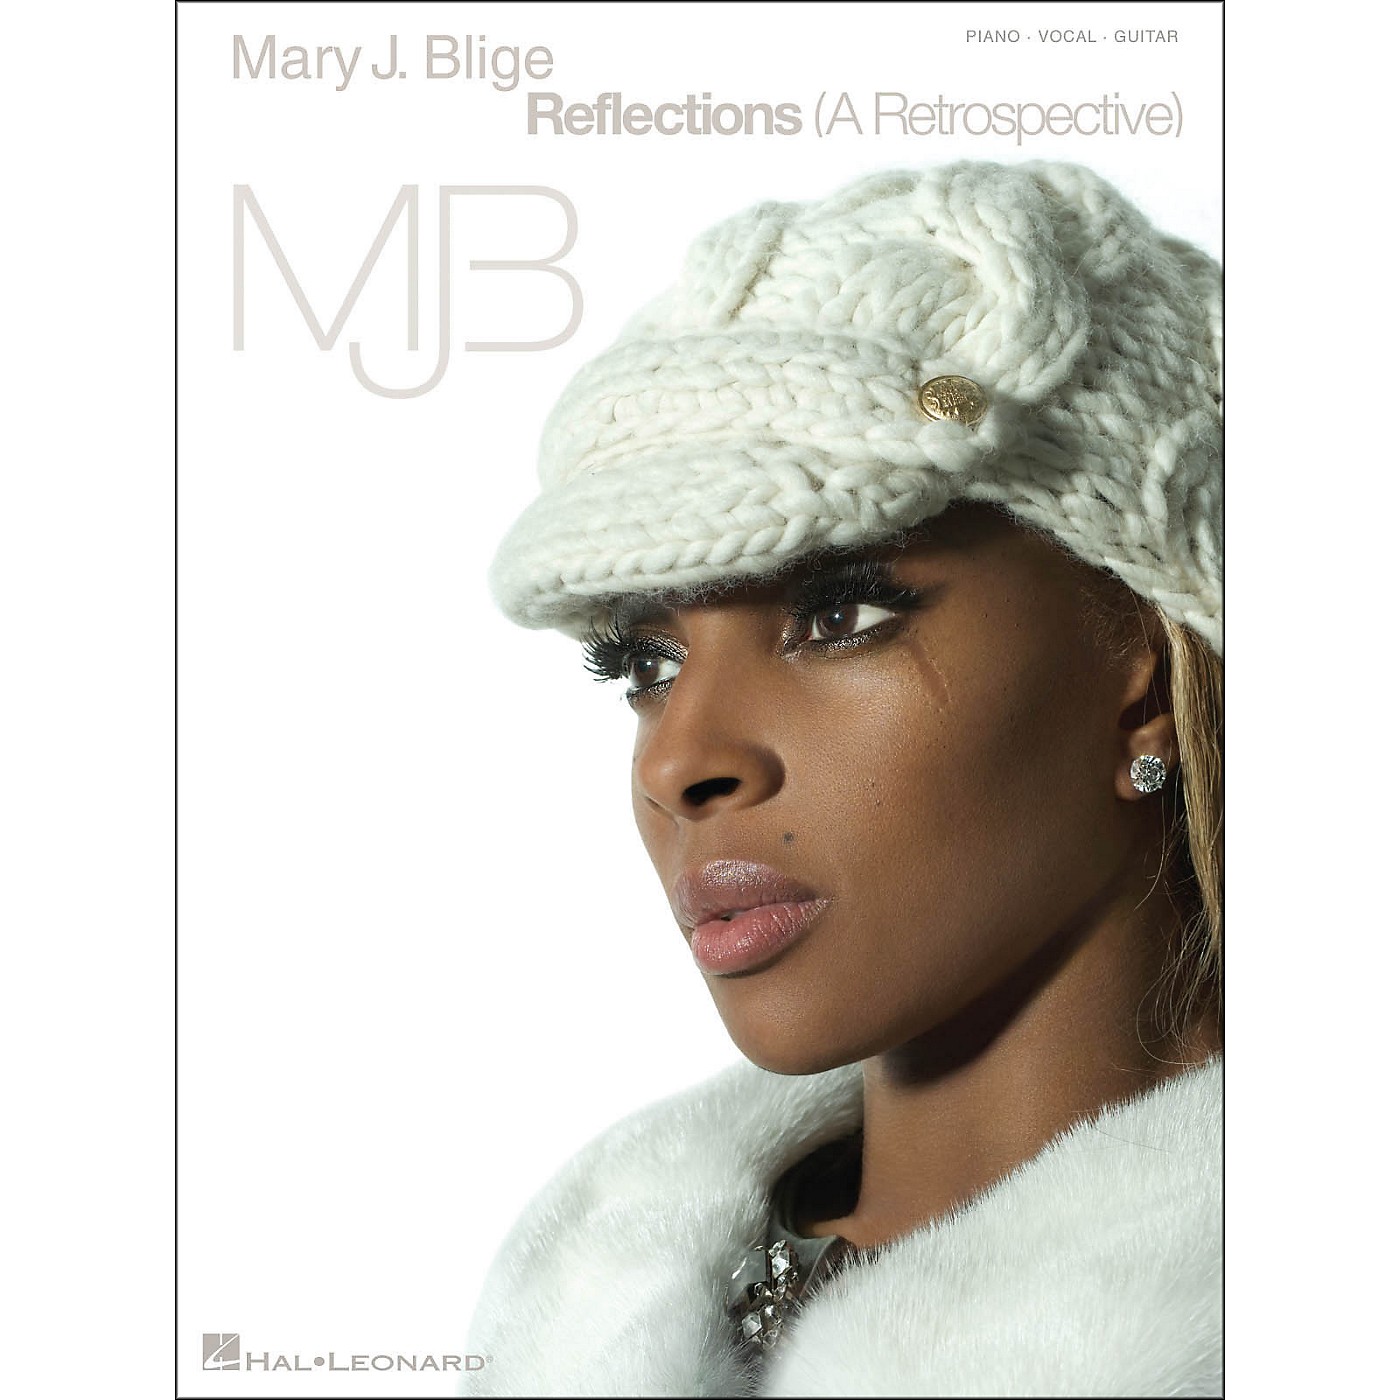 Hal Leonard Mary J. Blige Reflections (A Retrospective) arranged for piano, vocal, and guitar (P/V/G) thumbnail